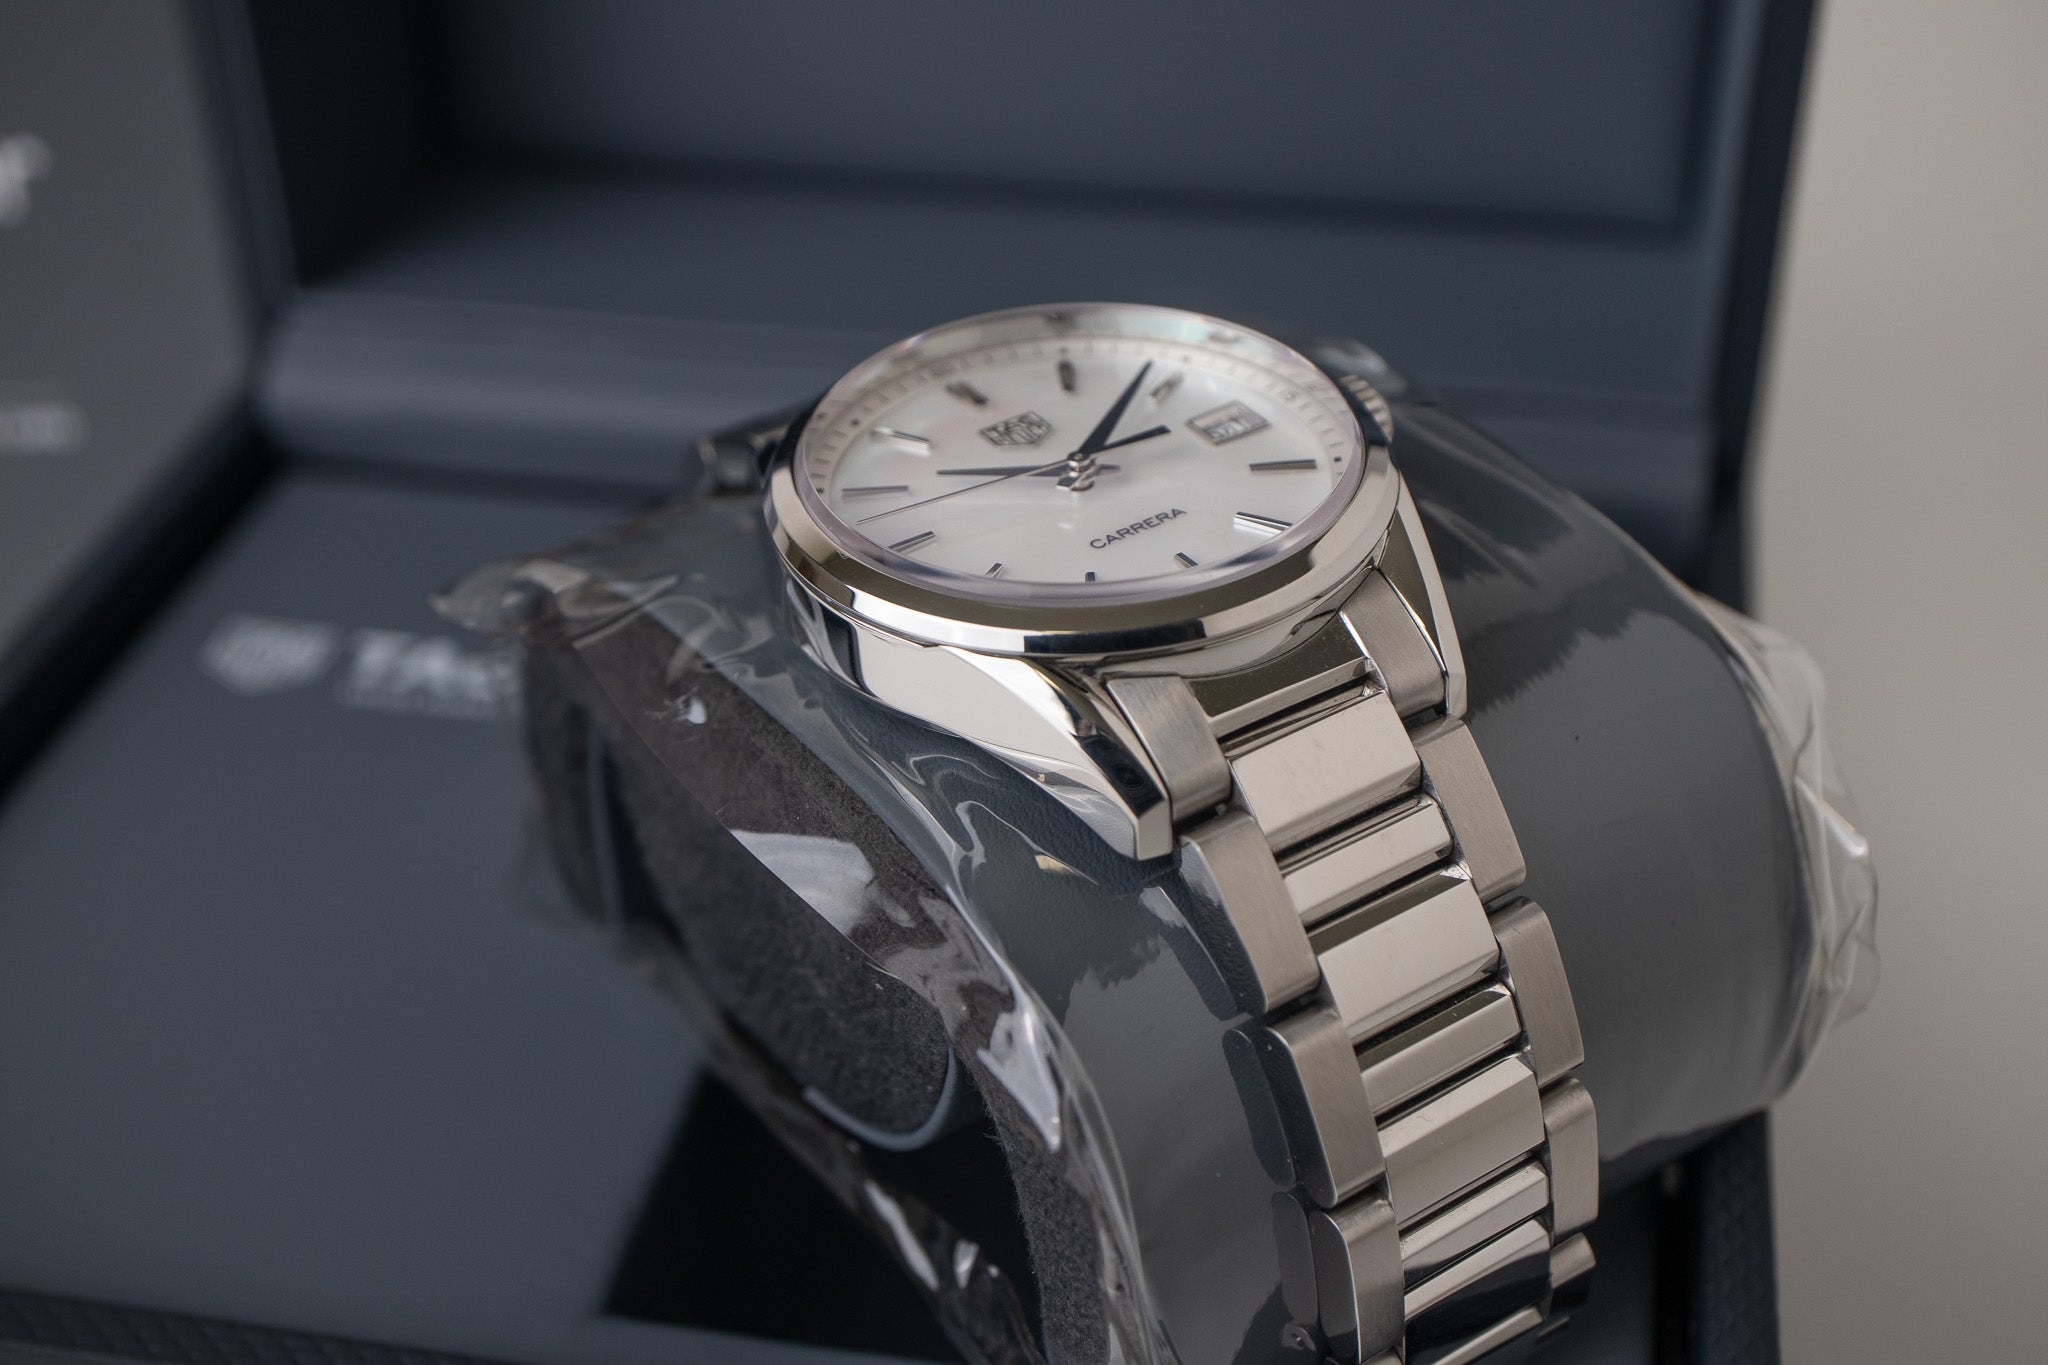 Tag Heuer Carrera Mother Of Pearl